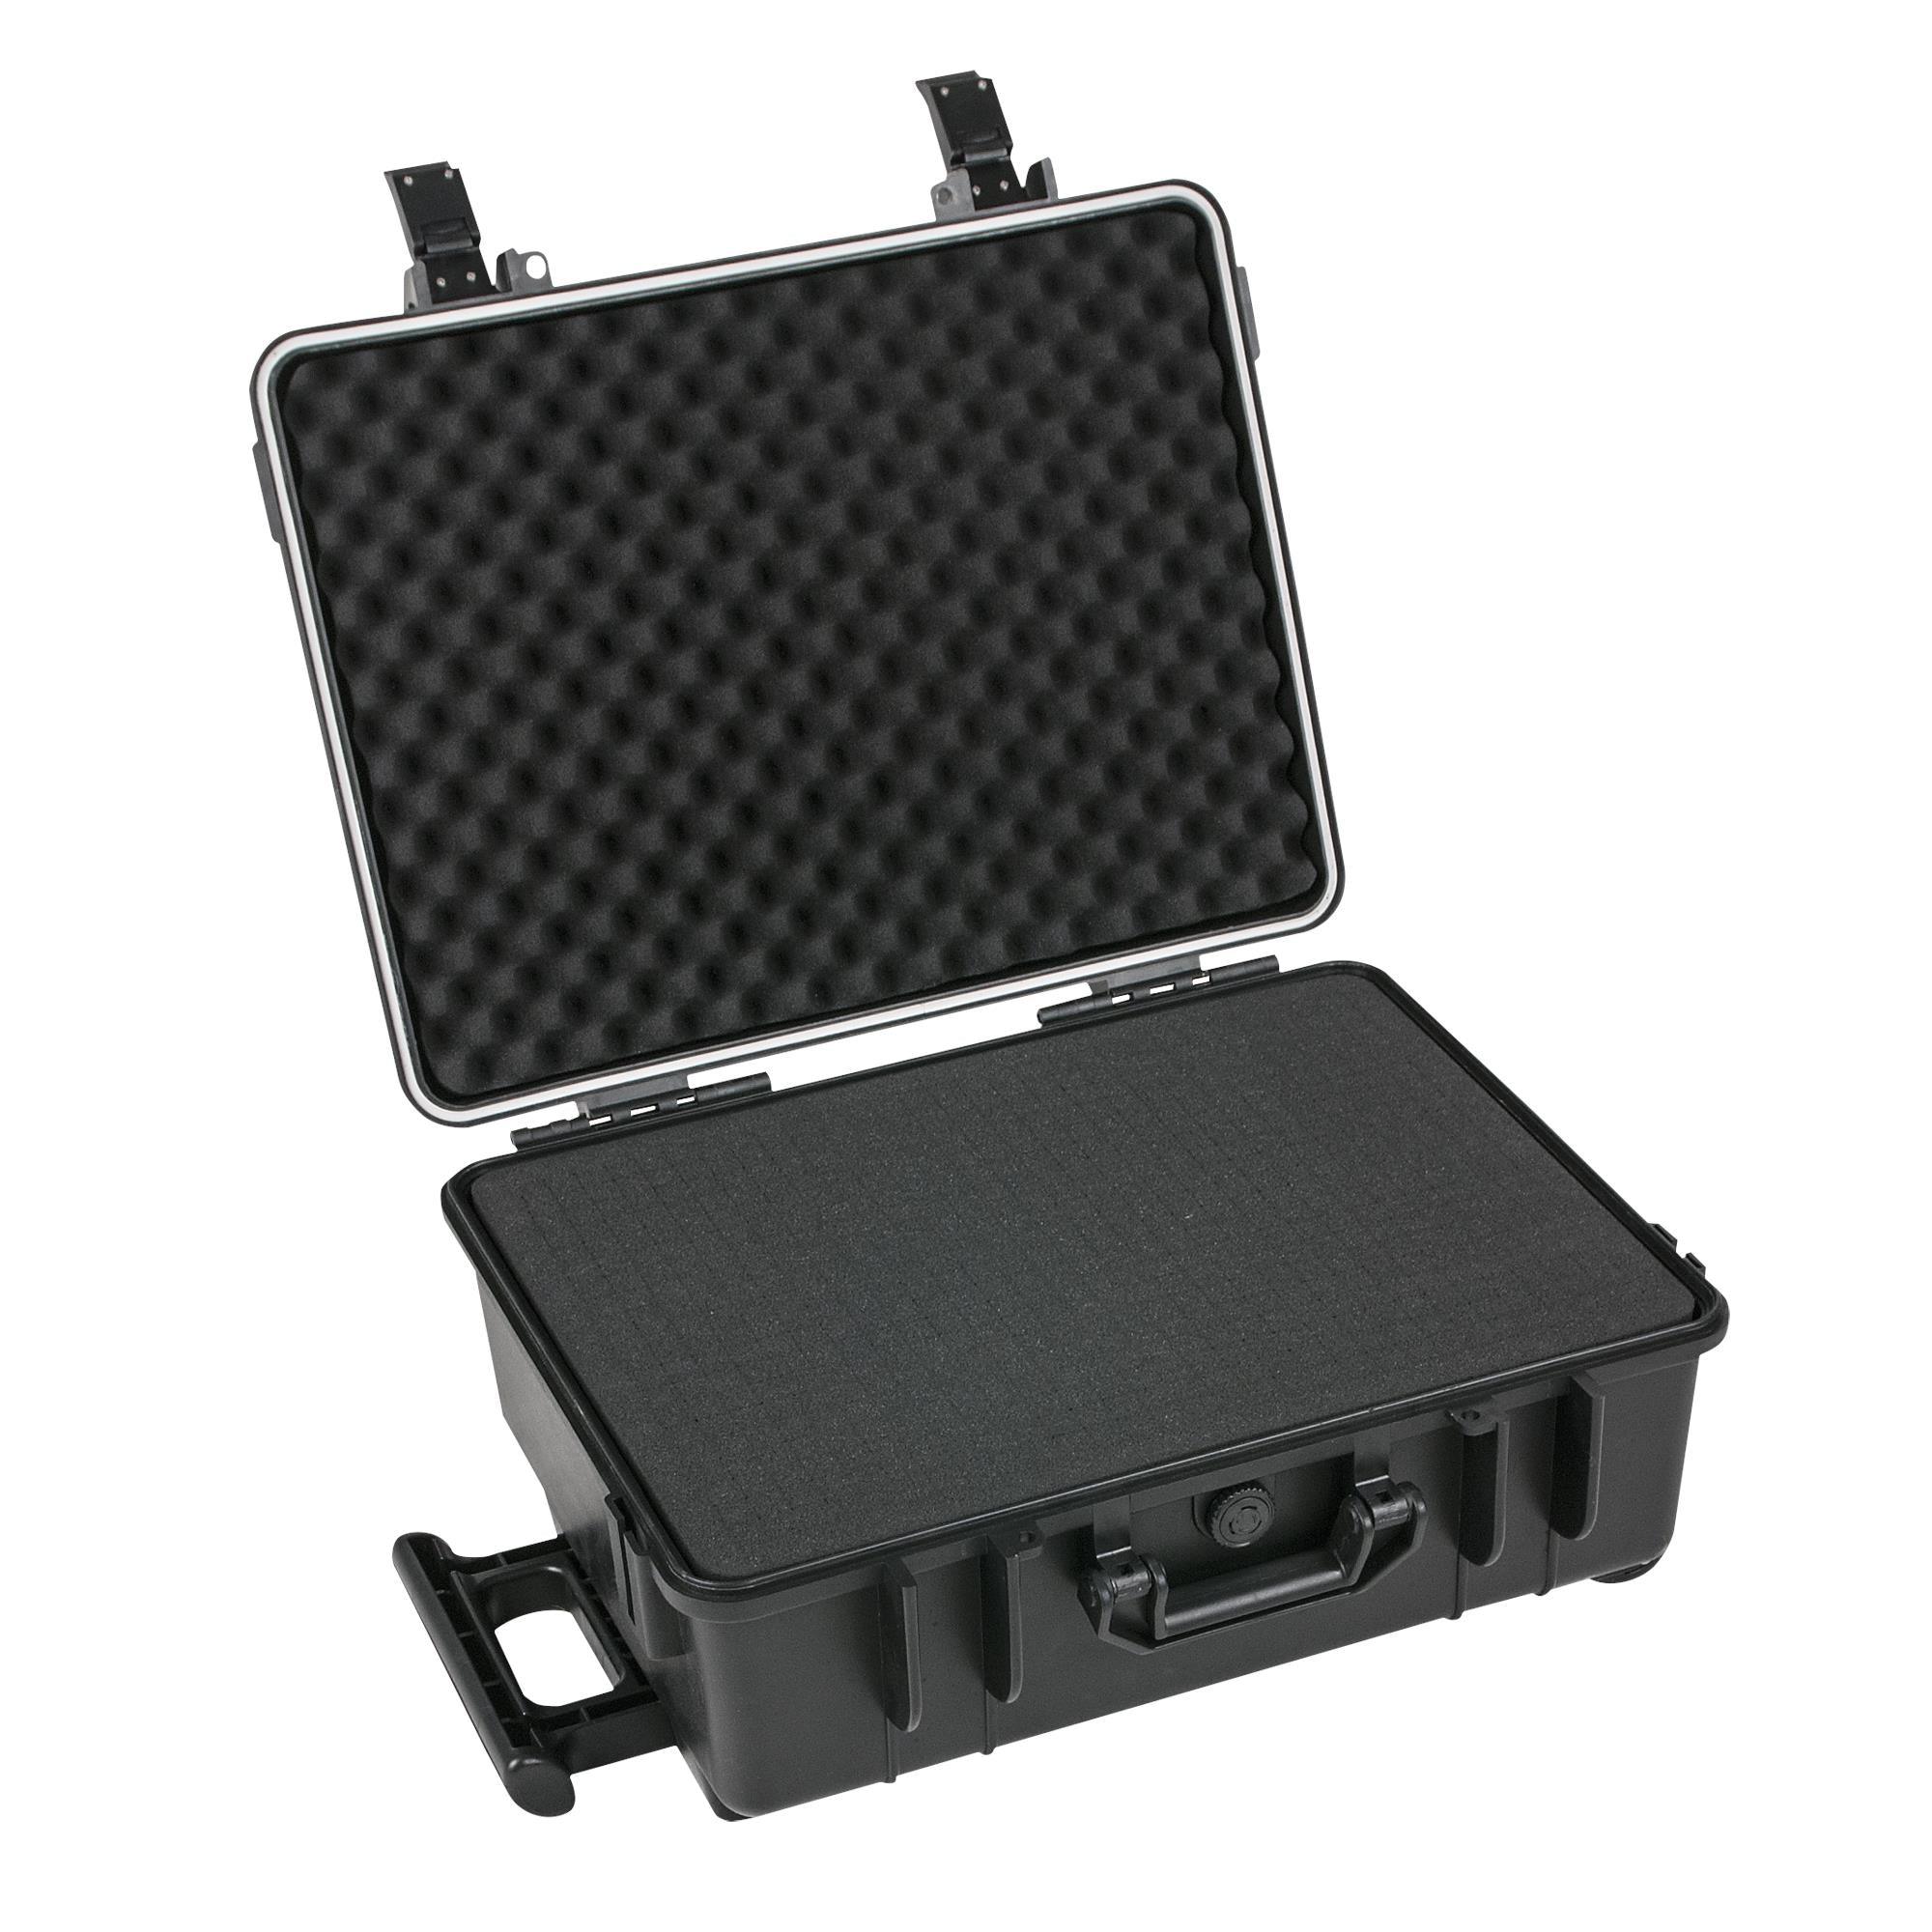 Showgear Daily Case 30 With Trolley 570x420x230mm - DY Pro Audio